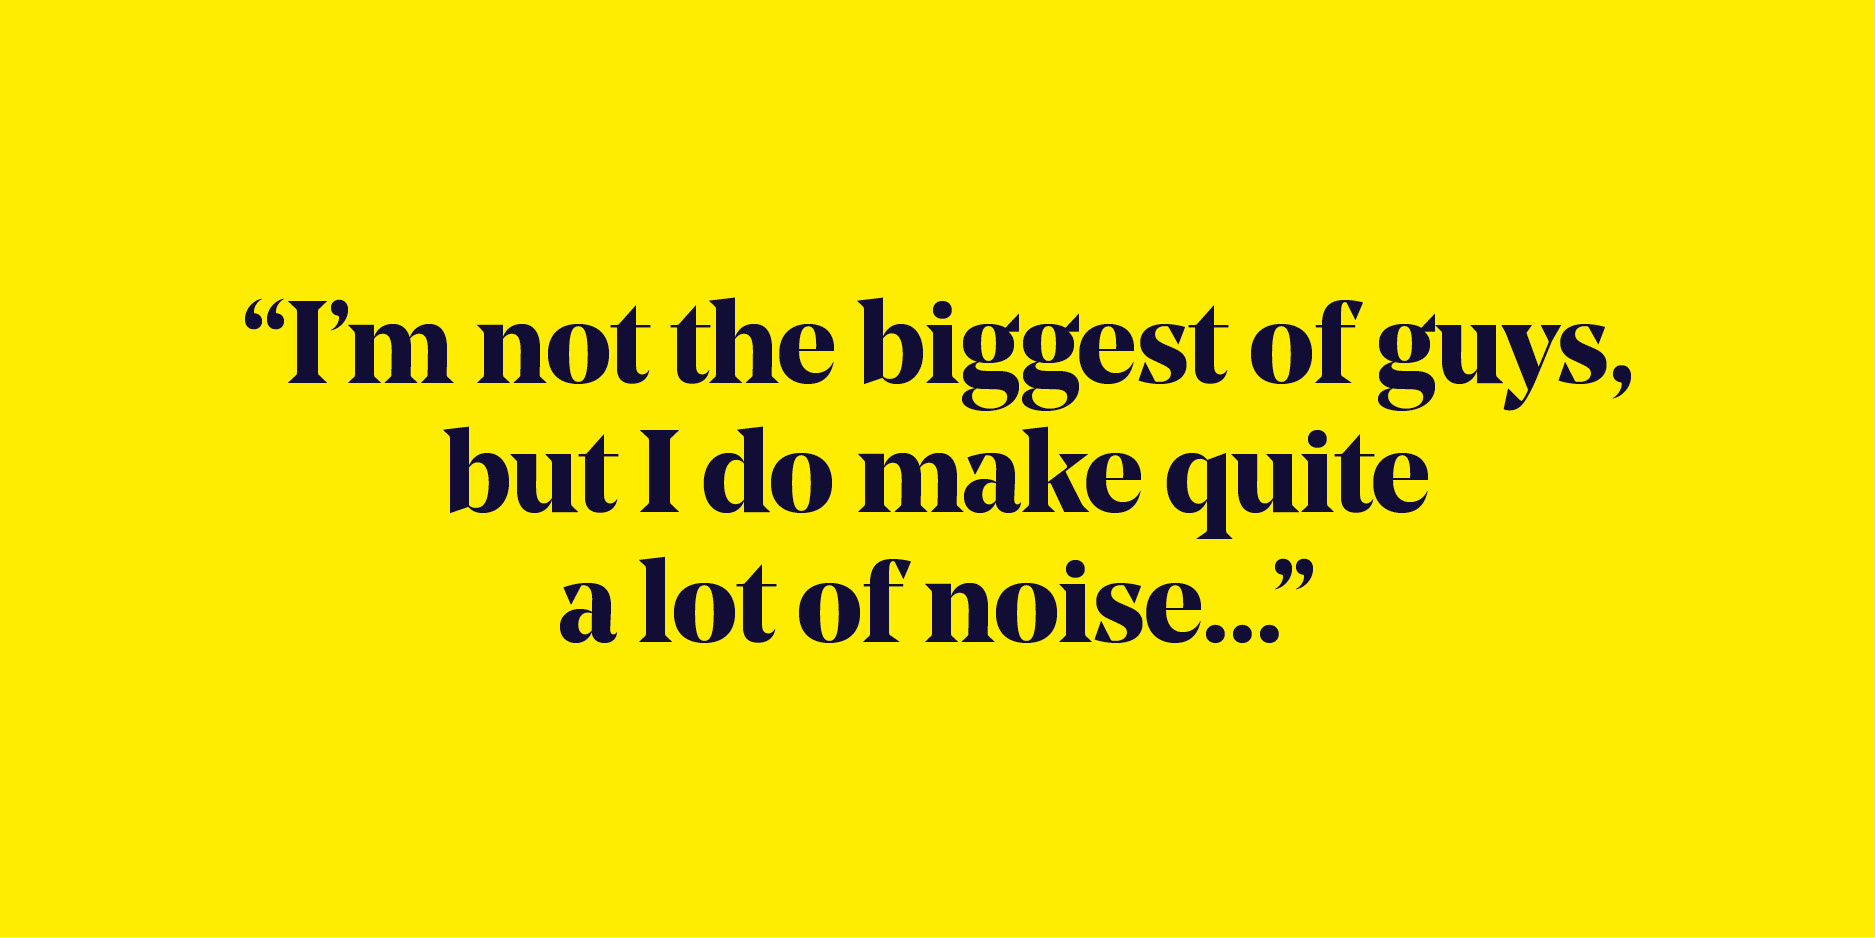 Quote: "I'm not the biggest of guys, but I do make quite a lot of noise..."